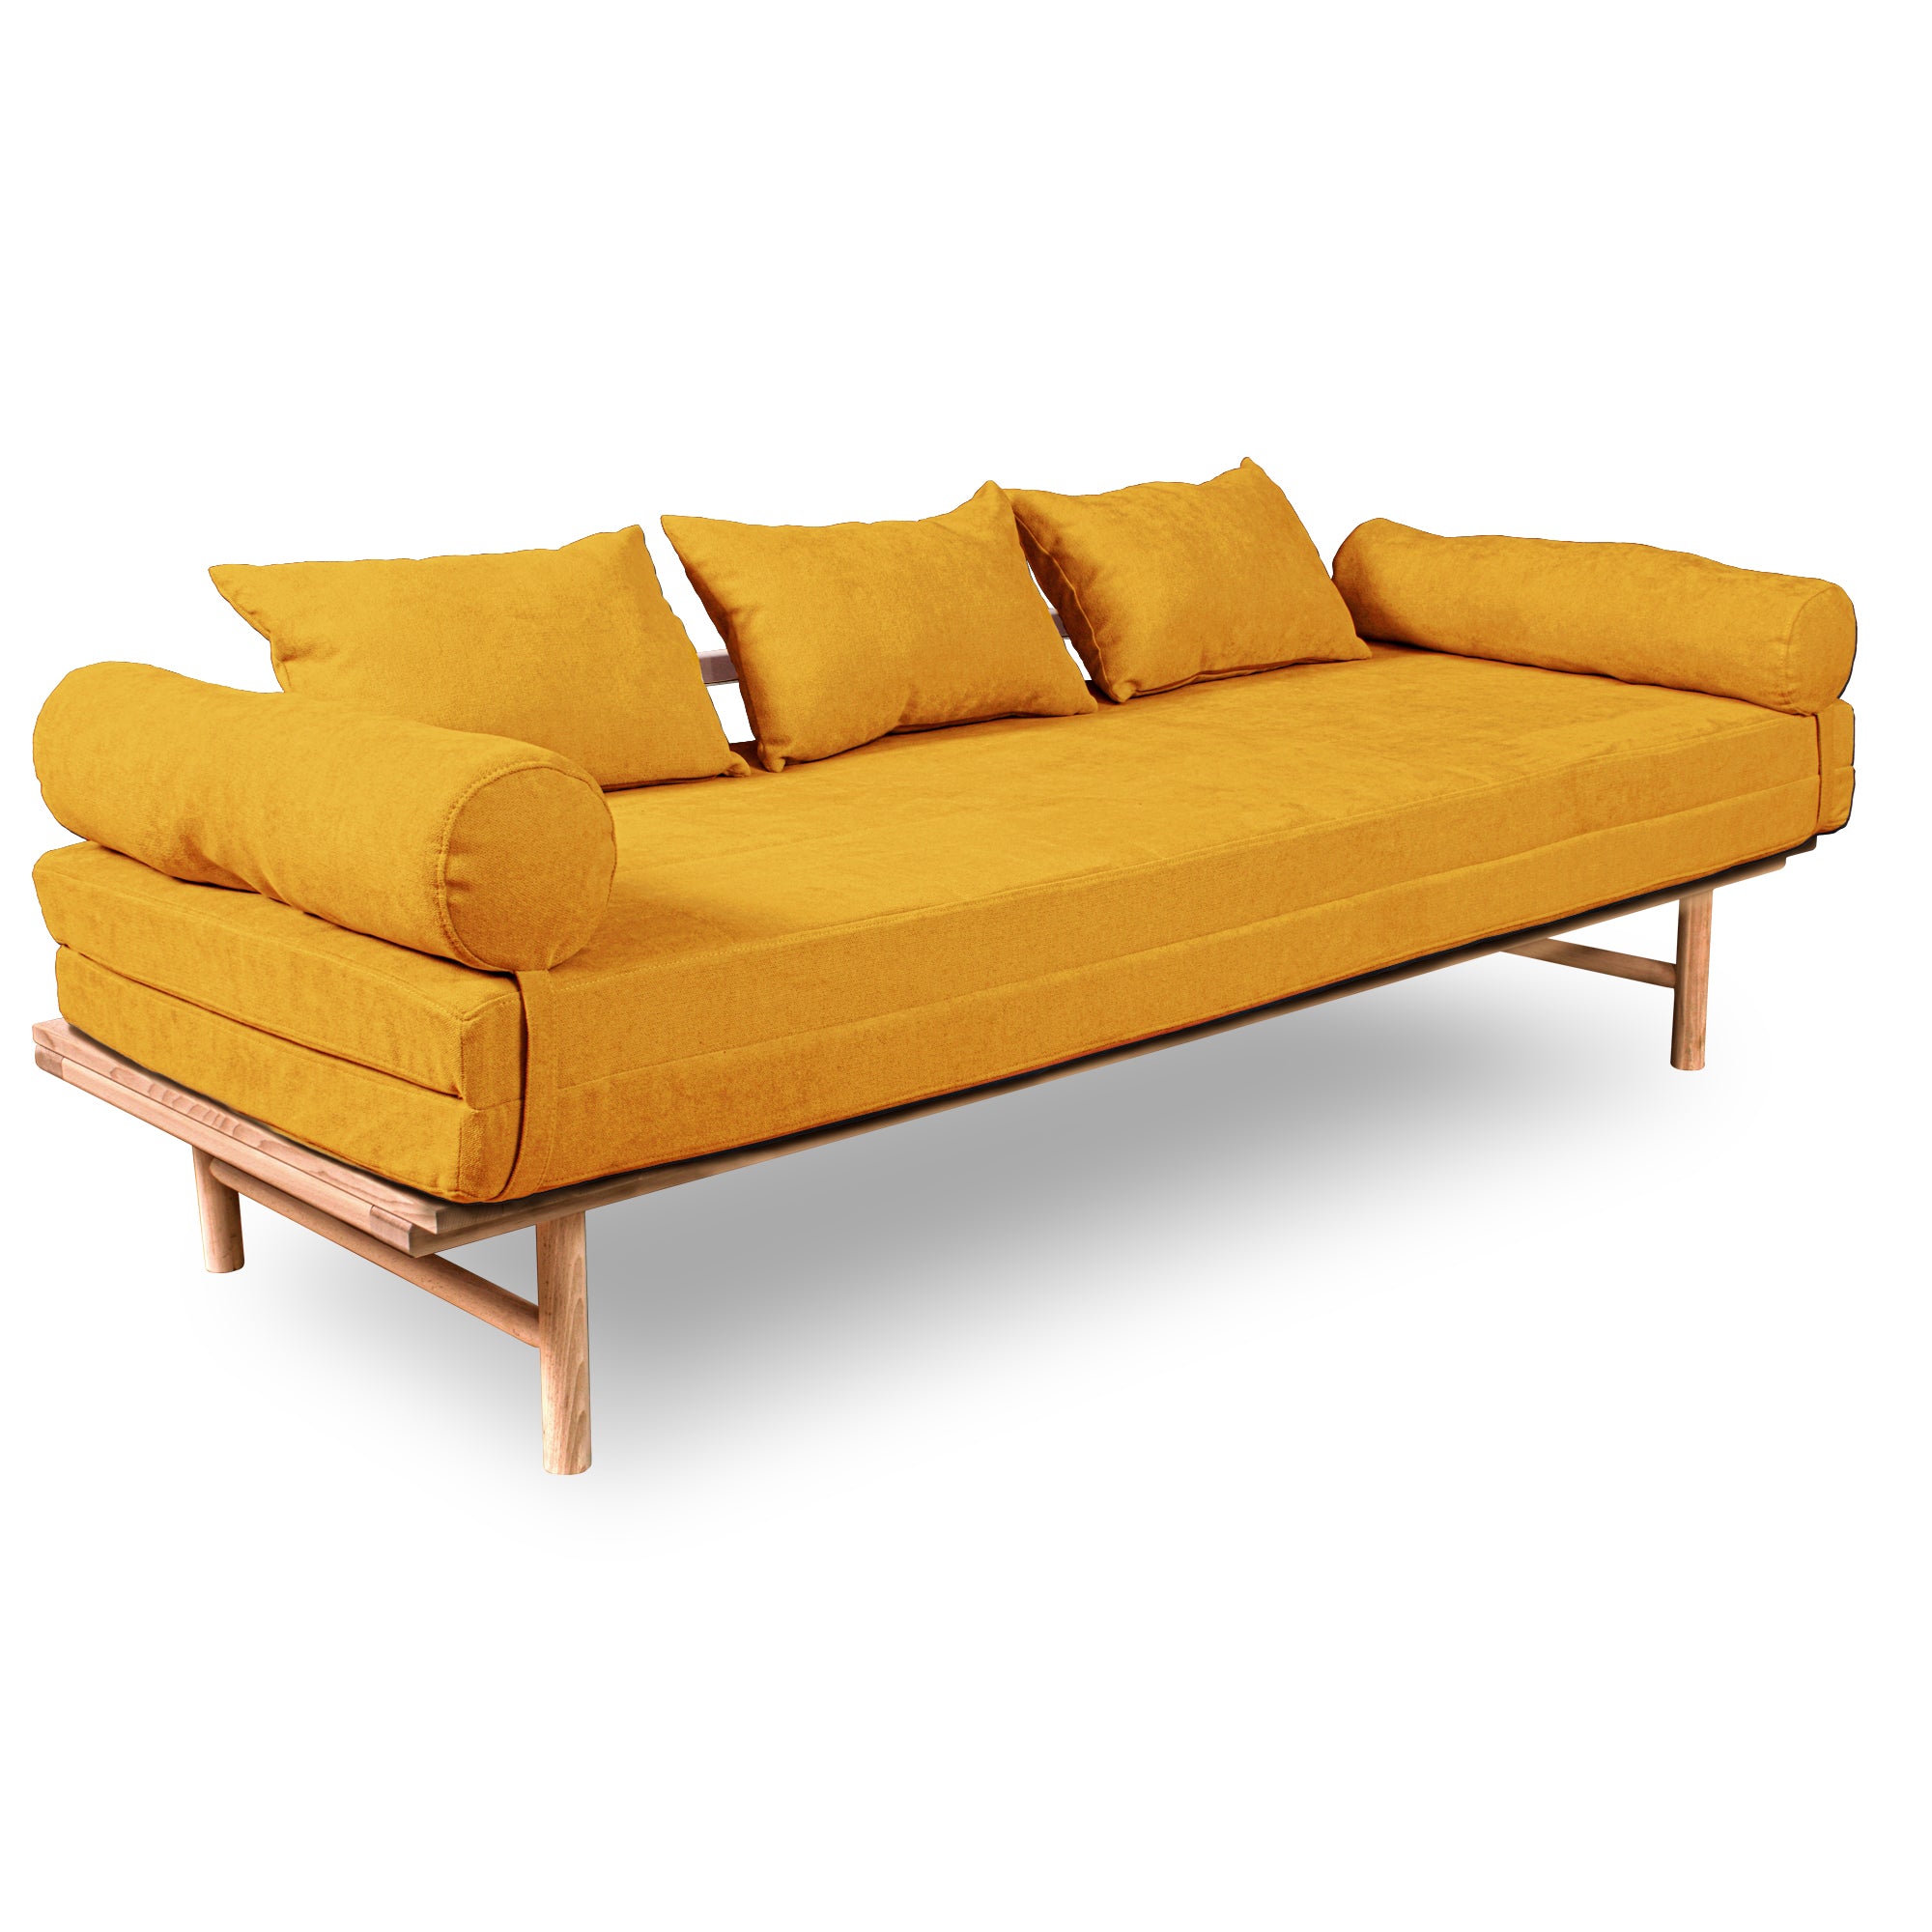 Le MAR Folding Daybed, Beech Wood Frame, Natural Colour-upholstery yellow